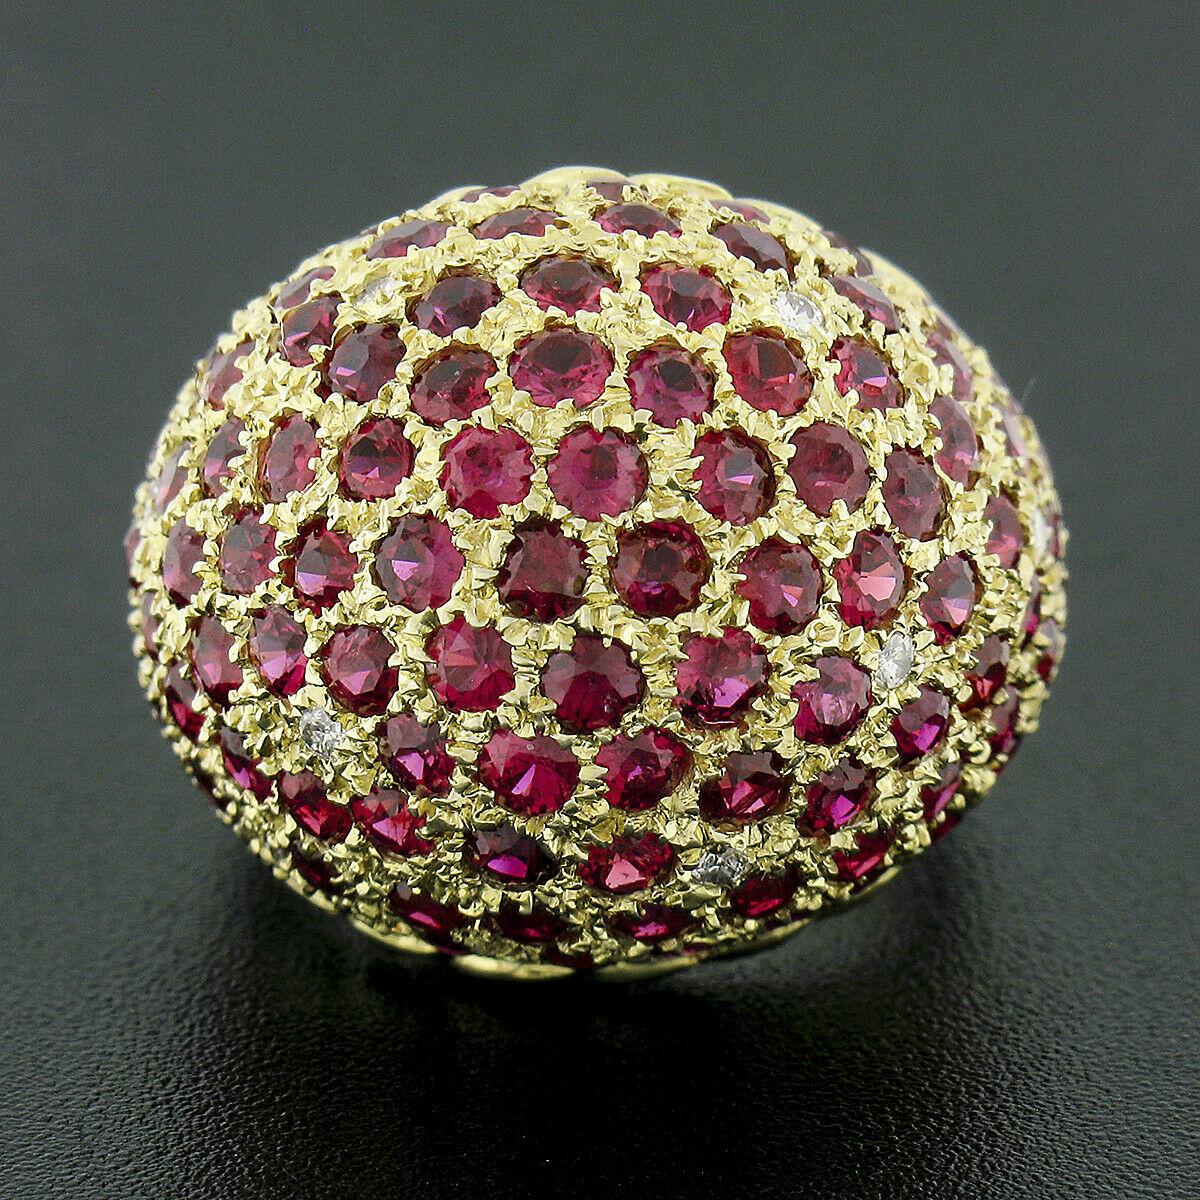 This magnificent vintage bombe ring was crafted from solid 14k yellow gold and features a large domed top of which is drenched with approximately 6.00 carats of fine quality rubies throughout. The round brilliant cut rubies are neatly pave set and